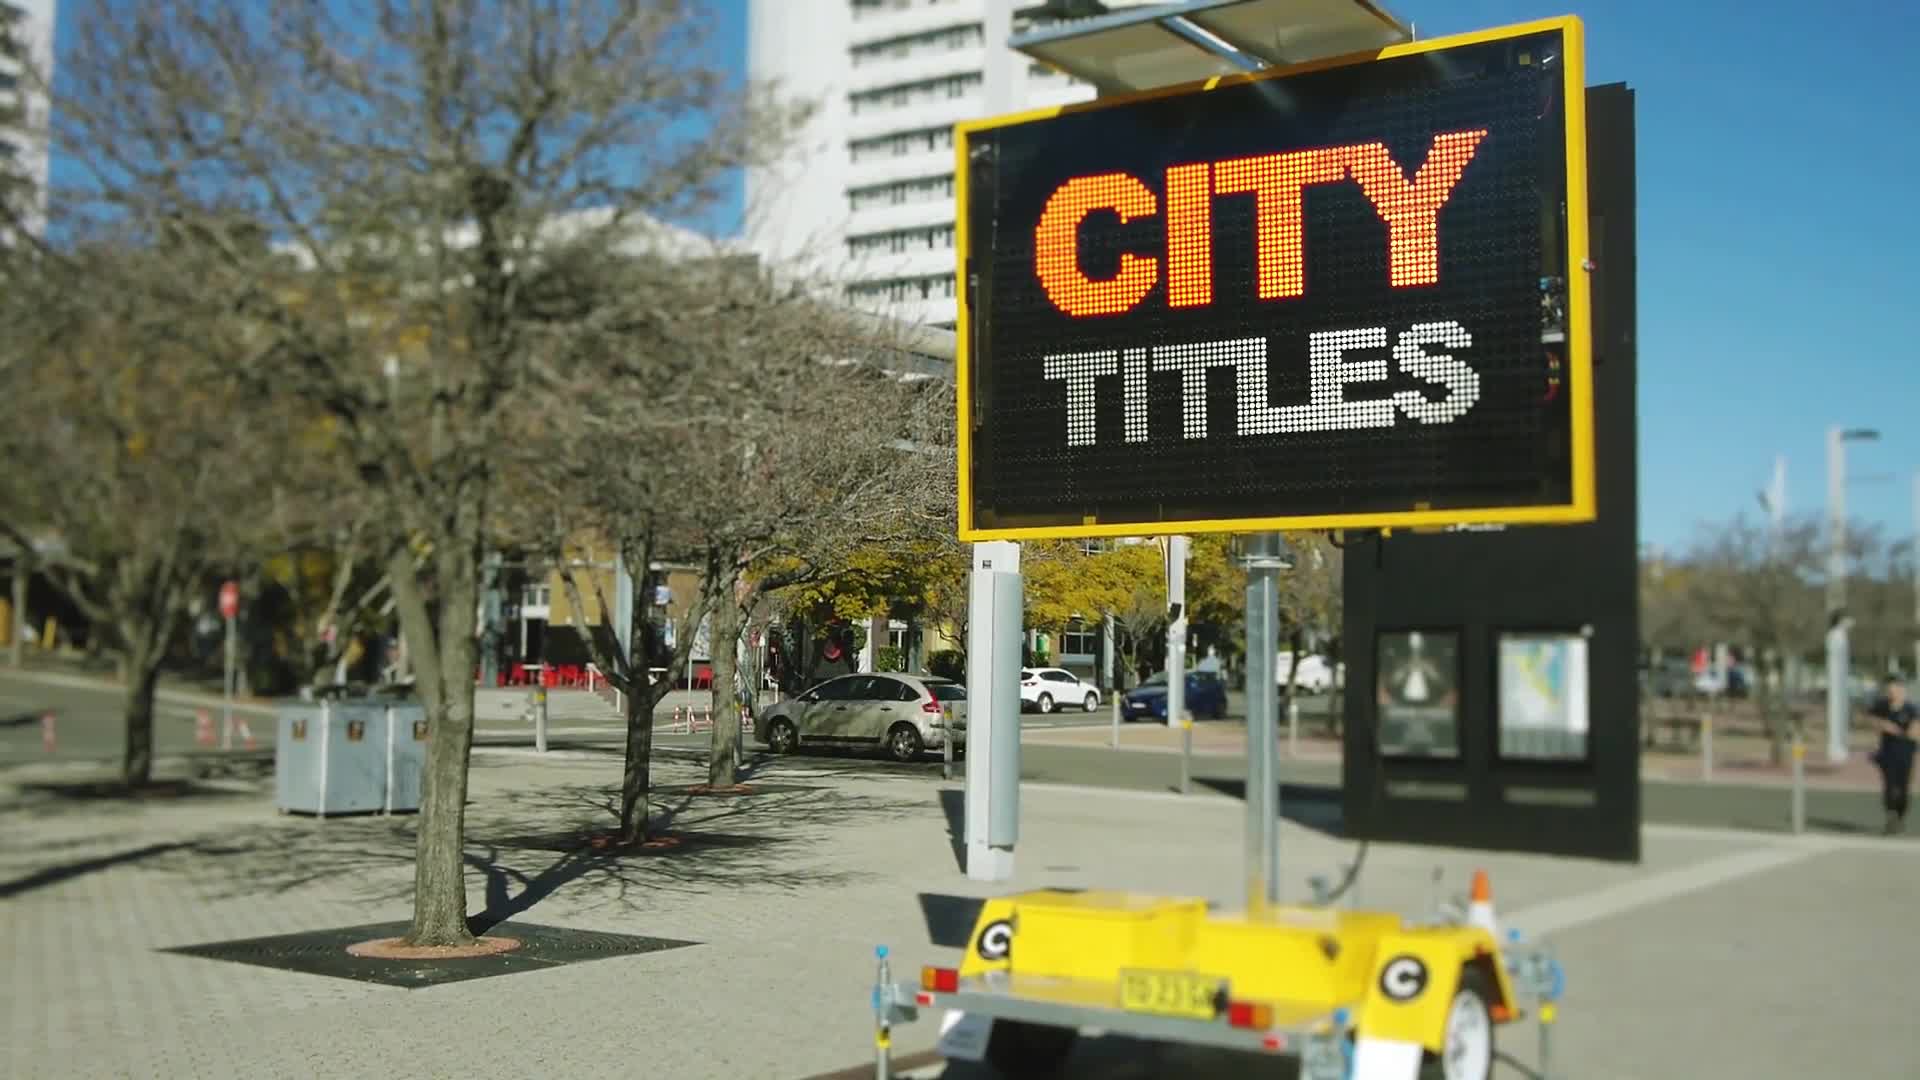 City Titles | Realistic Titles Opener - Download Videohive 20474507